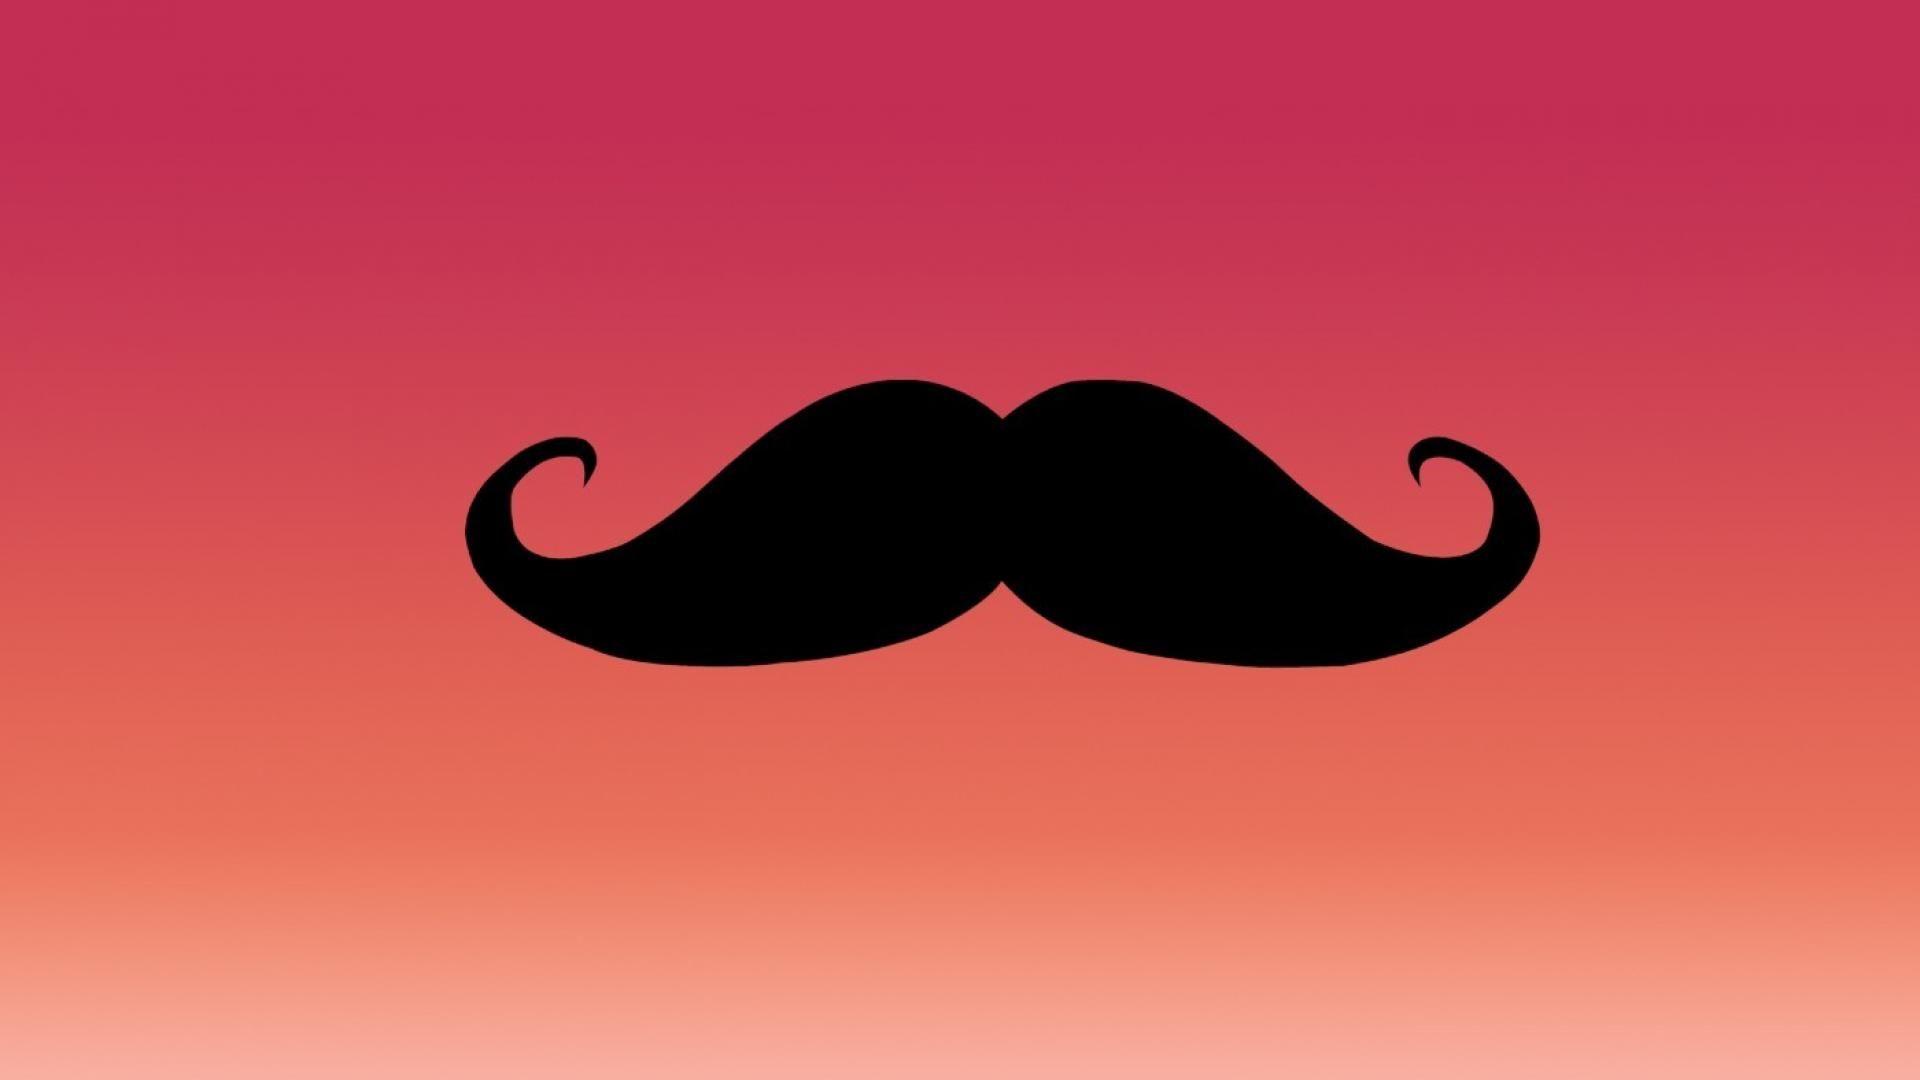 Awesome Mustache Wallpaper for Phones and Walls Mens Stylists. HD